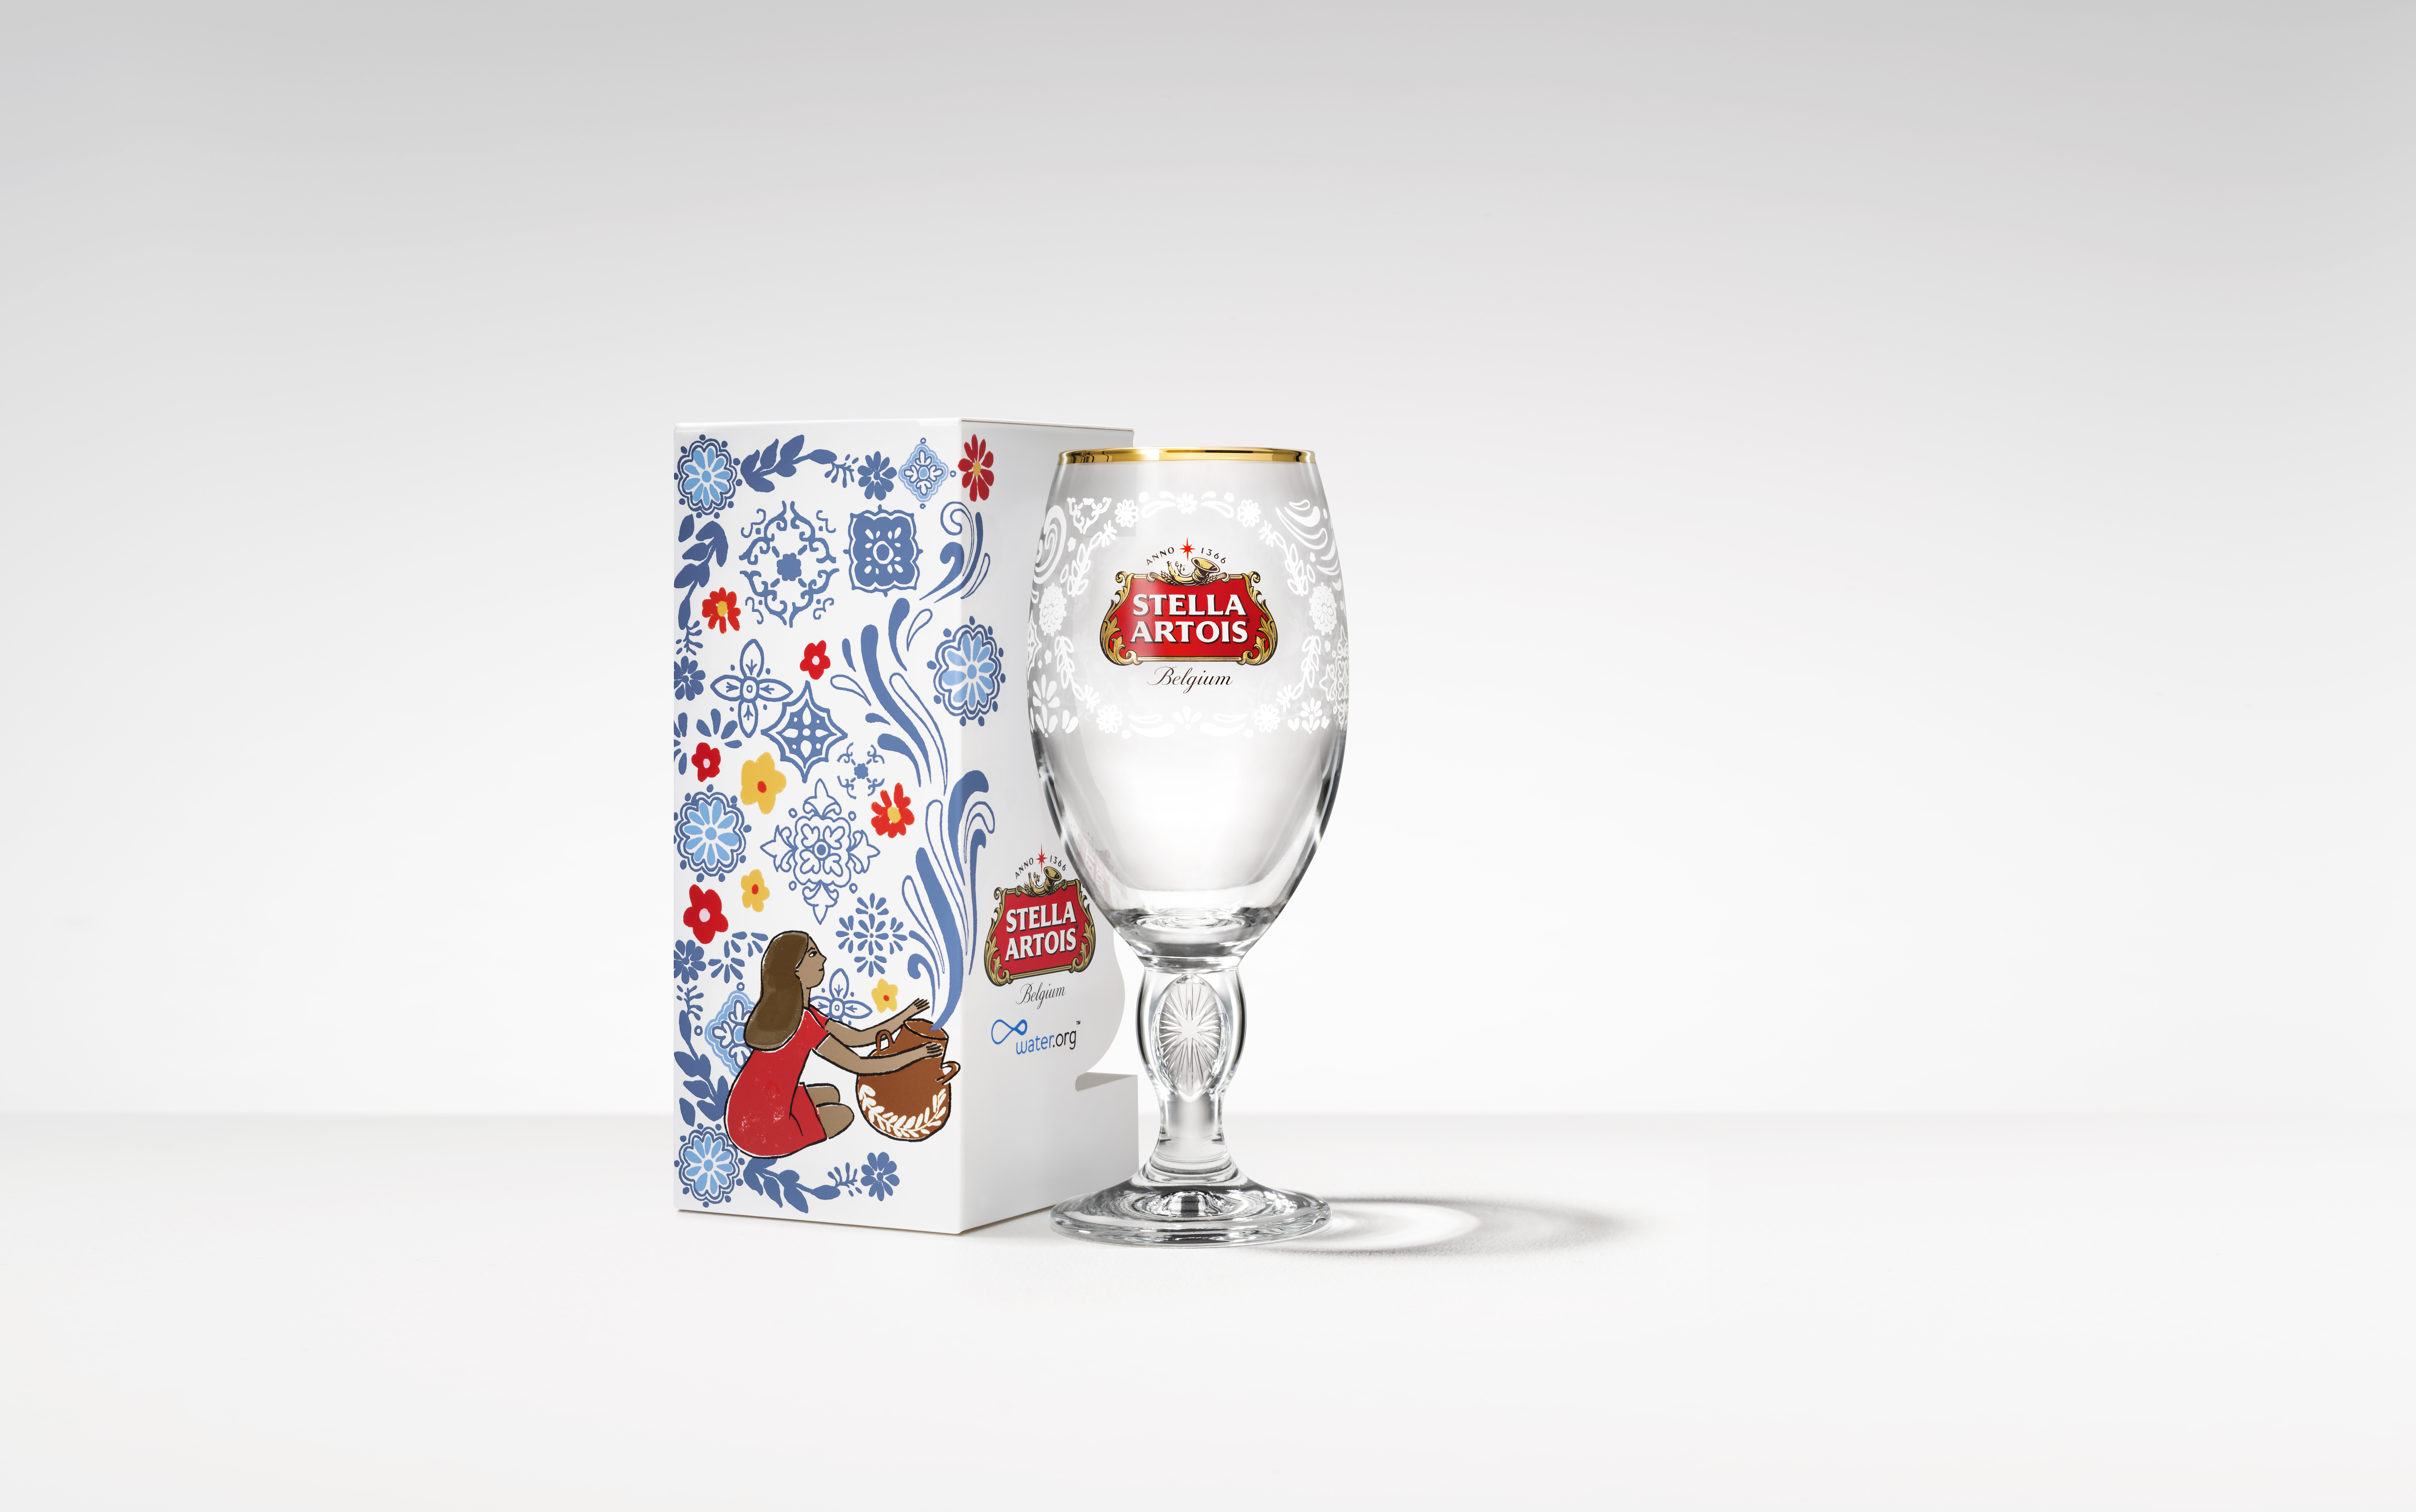 New Stella Artois Limited-Edition Chalice designed by Silvana Avila of Mexico. The purchase of one Chalice helps Water.org provide five years of clean water to one person in the developing world. 